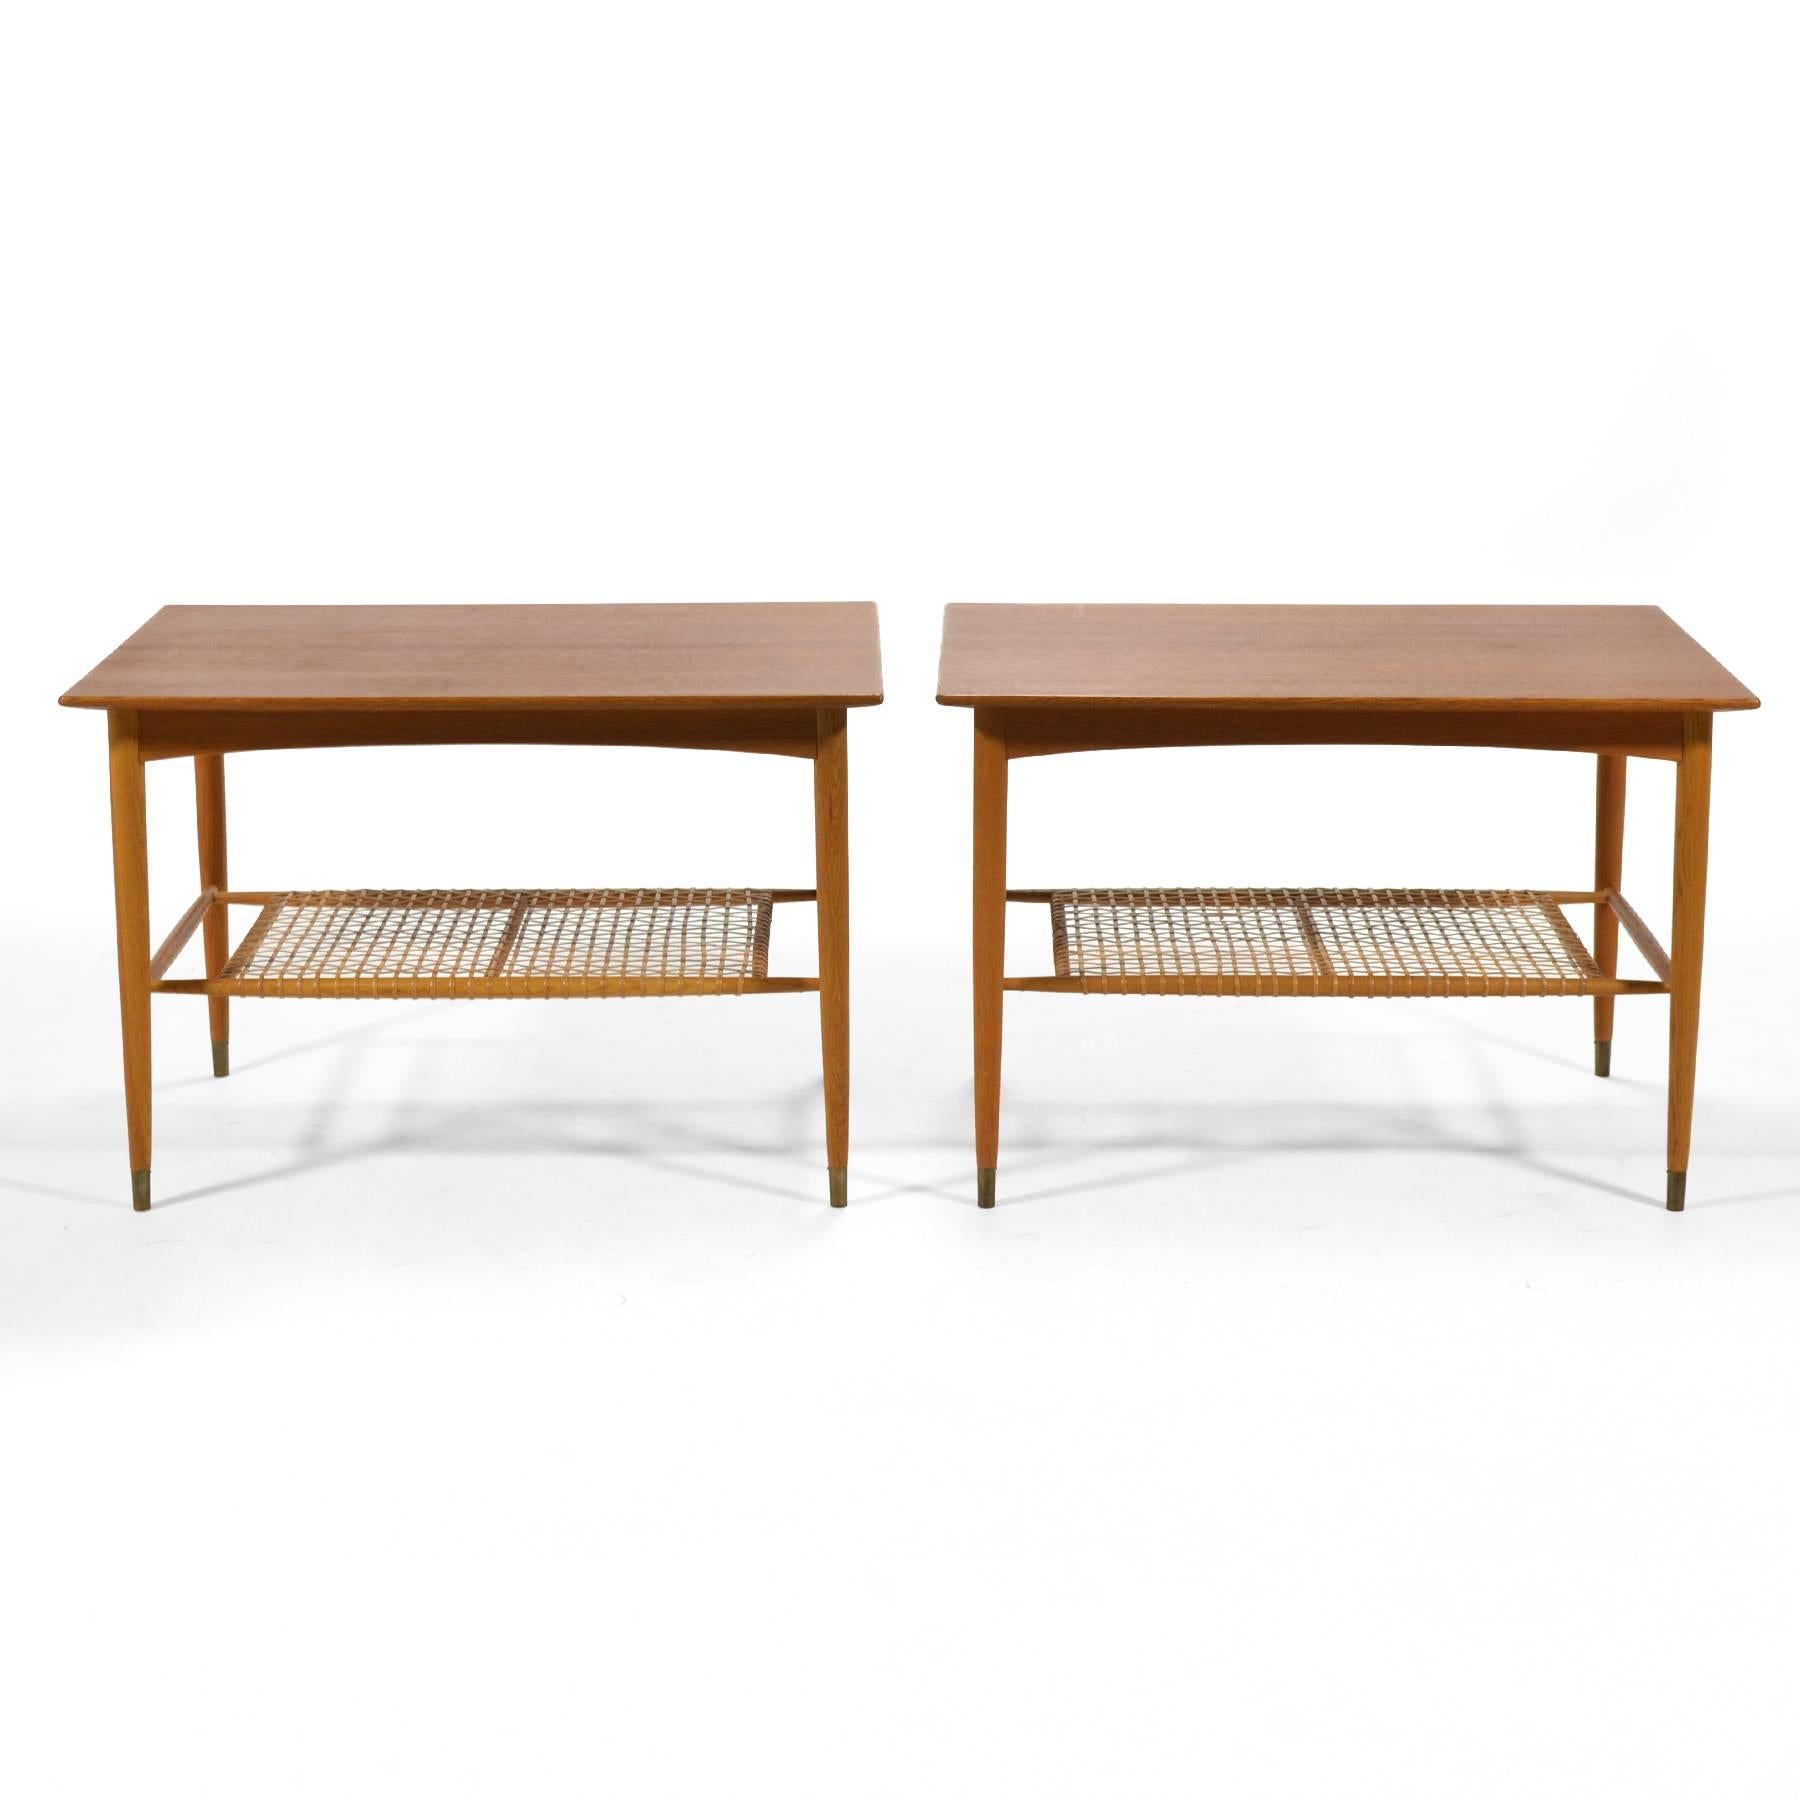 These Folke Ohlsson side tables have beautiful lines and wonderful proportions. They are expertly crafted of teak and oak and feature a woven cane shelf and brass capped feet.